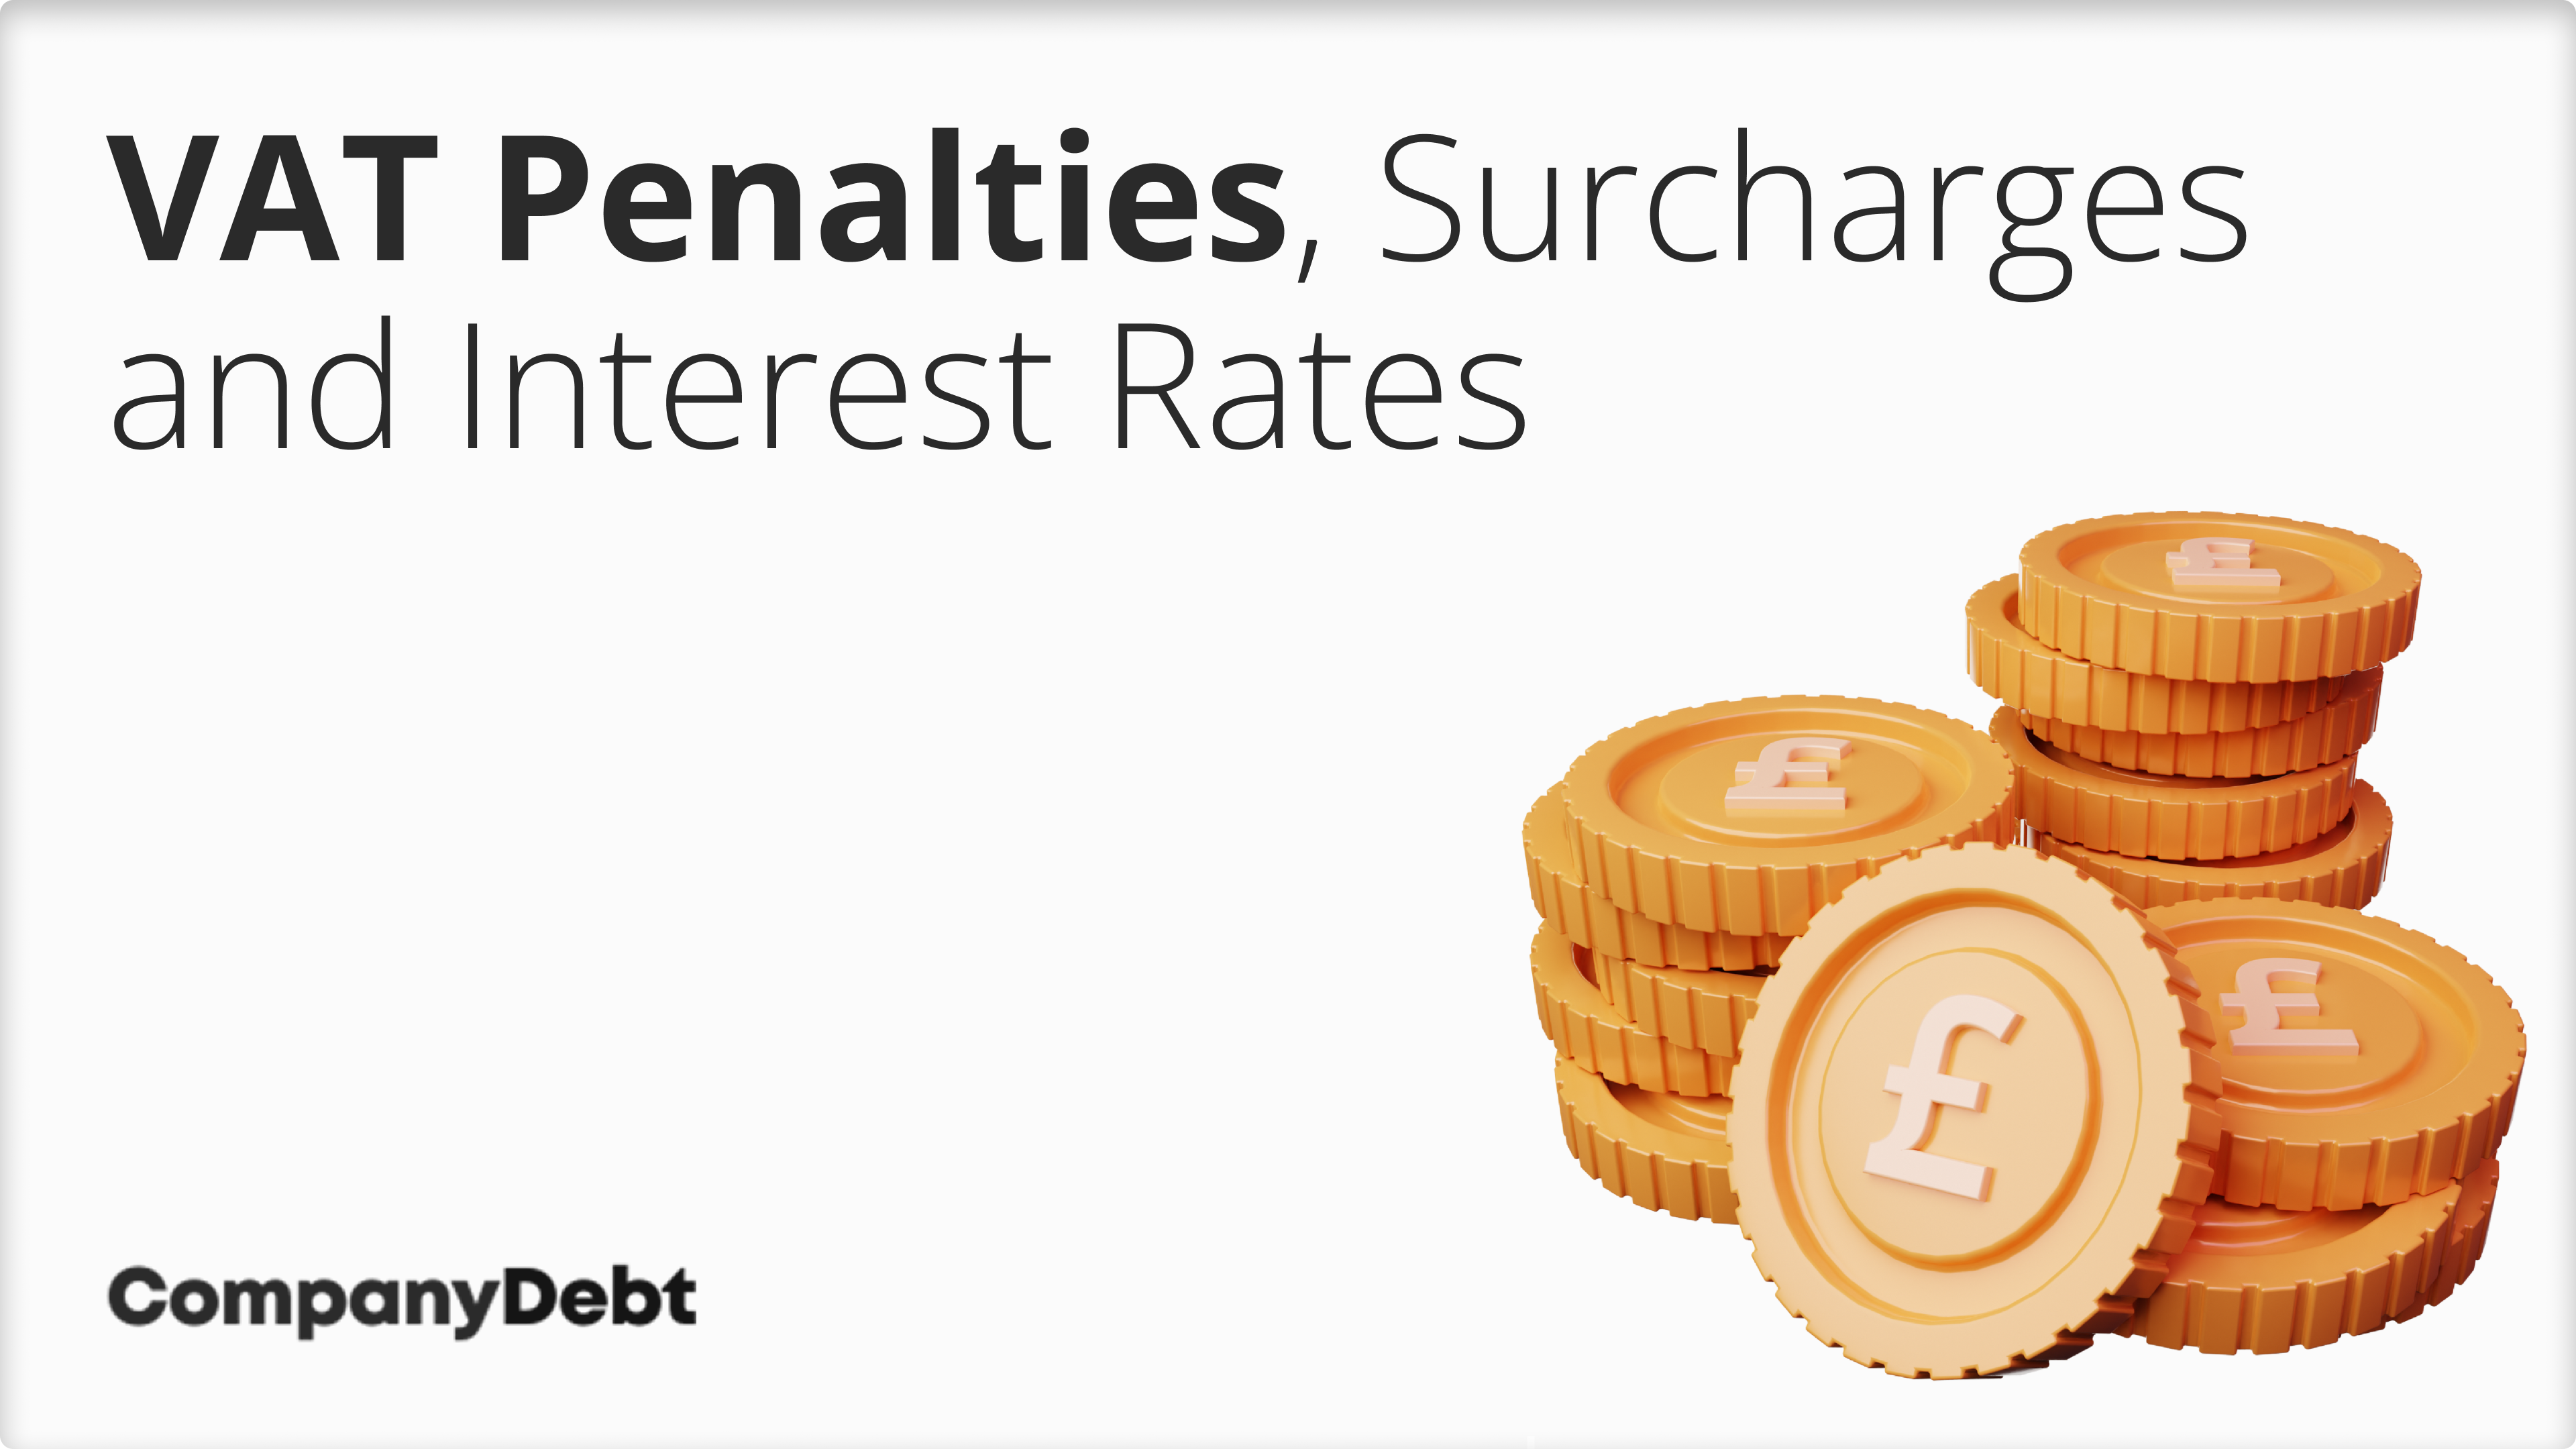 VAT Penalties, Surcharges and Interest Rates